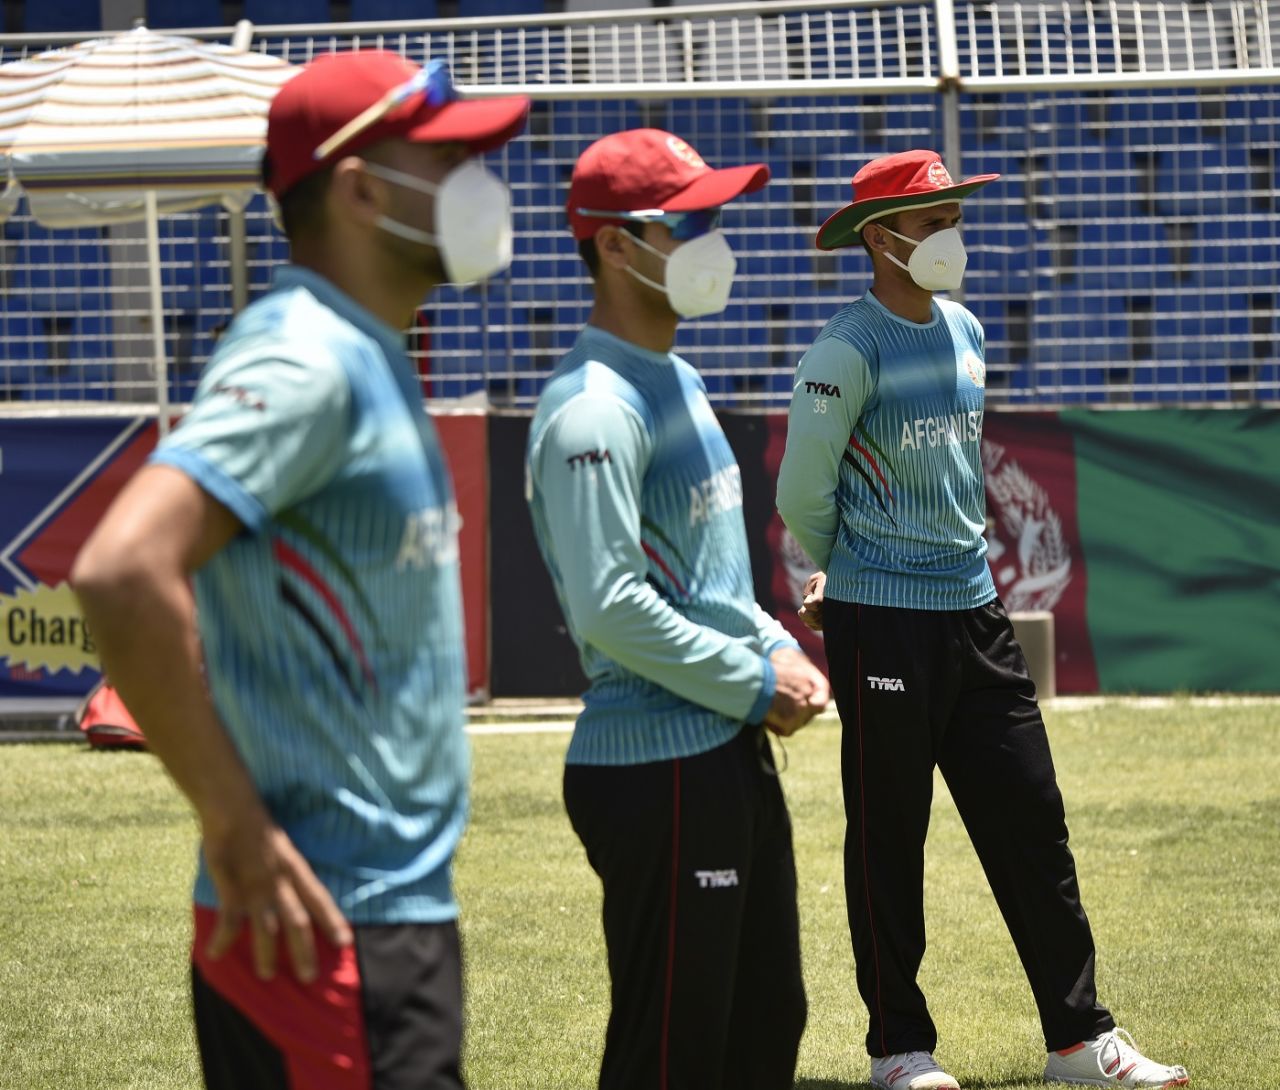 The Afghanistan players wear masks for their first training session after the Covid-19 break, Kabul, June 7, 2020